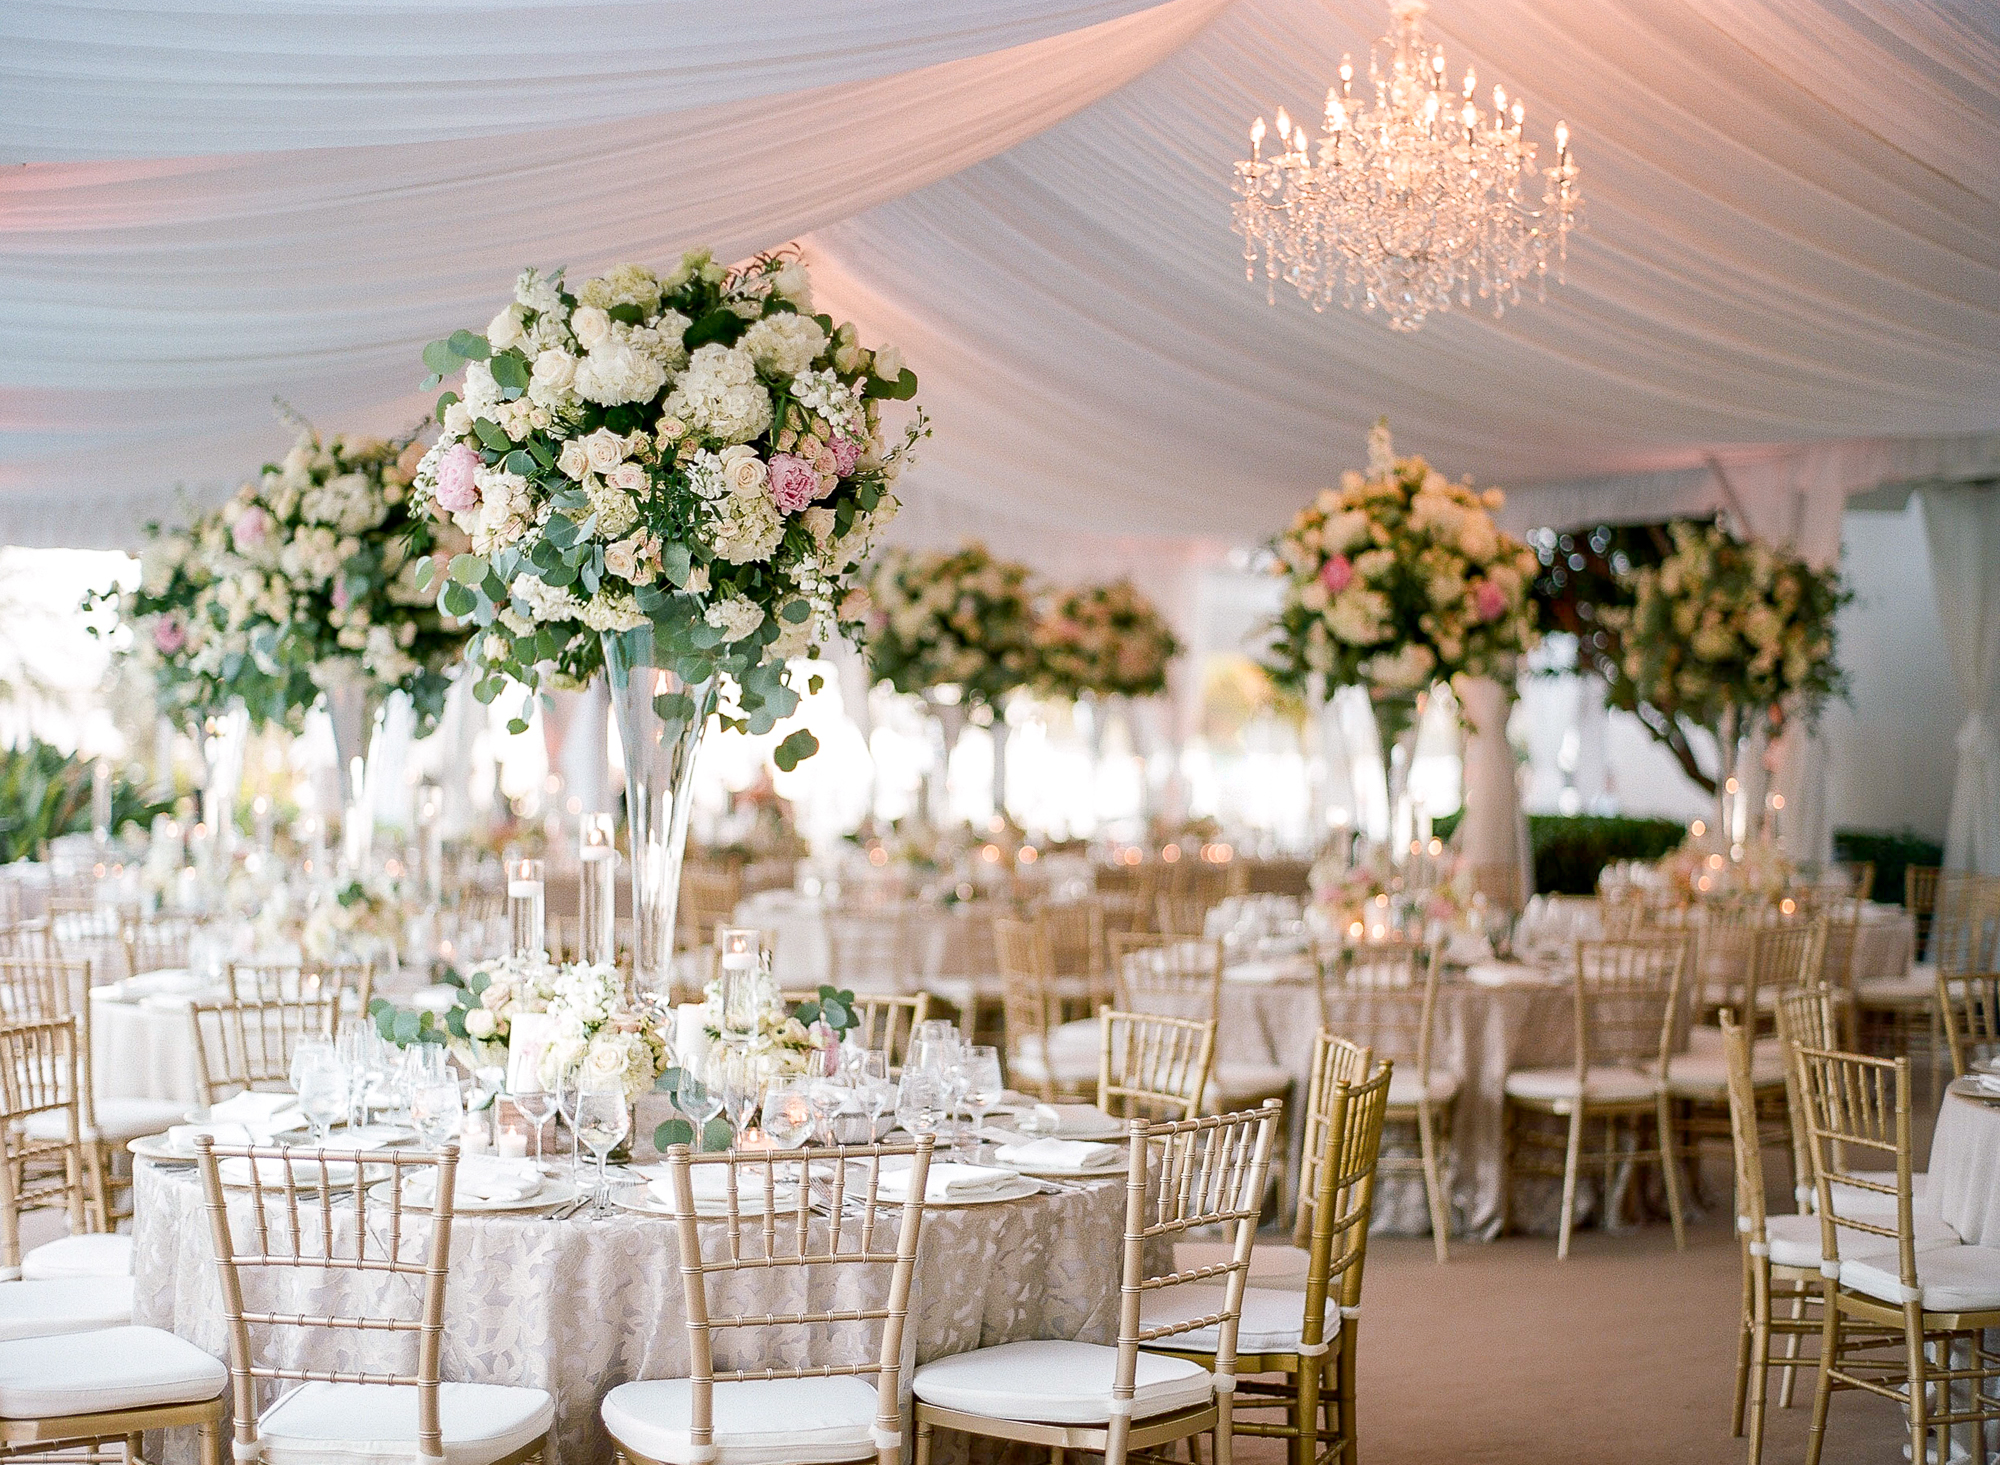 The fisher island club terrace was carpeted and tented with beautiful white draping and chandeliers